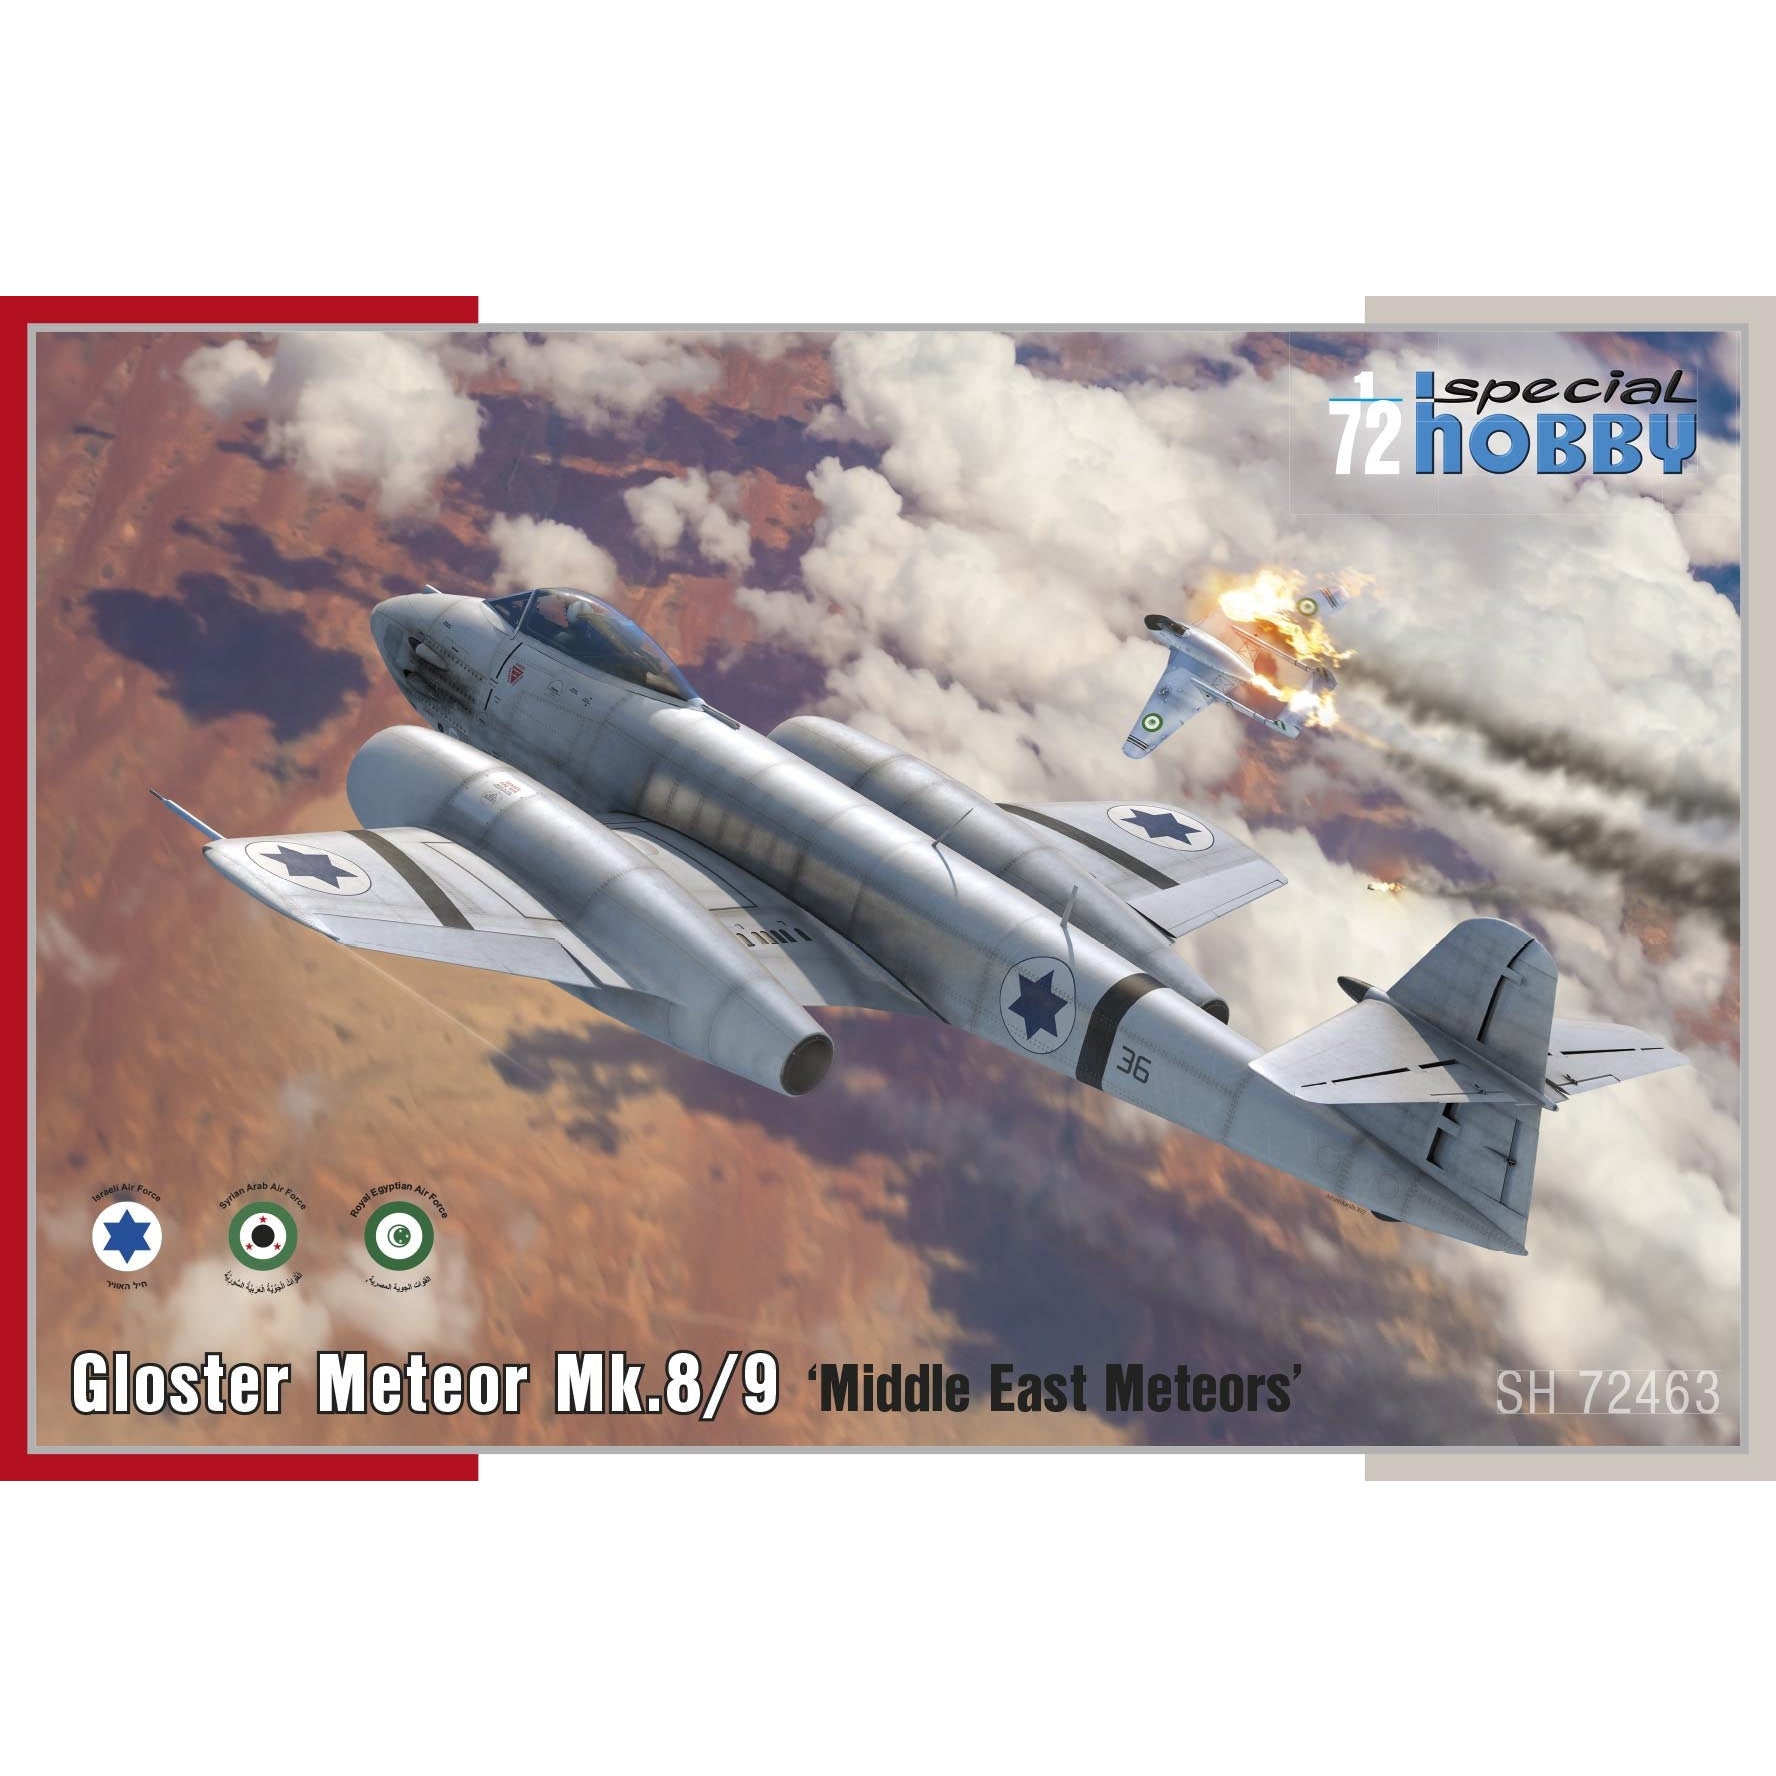 Gloster Meteor Mk.8/9 ‘Middle East Meteors’ 1/72 #SH72463 by Special Hobby